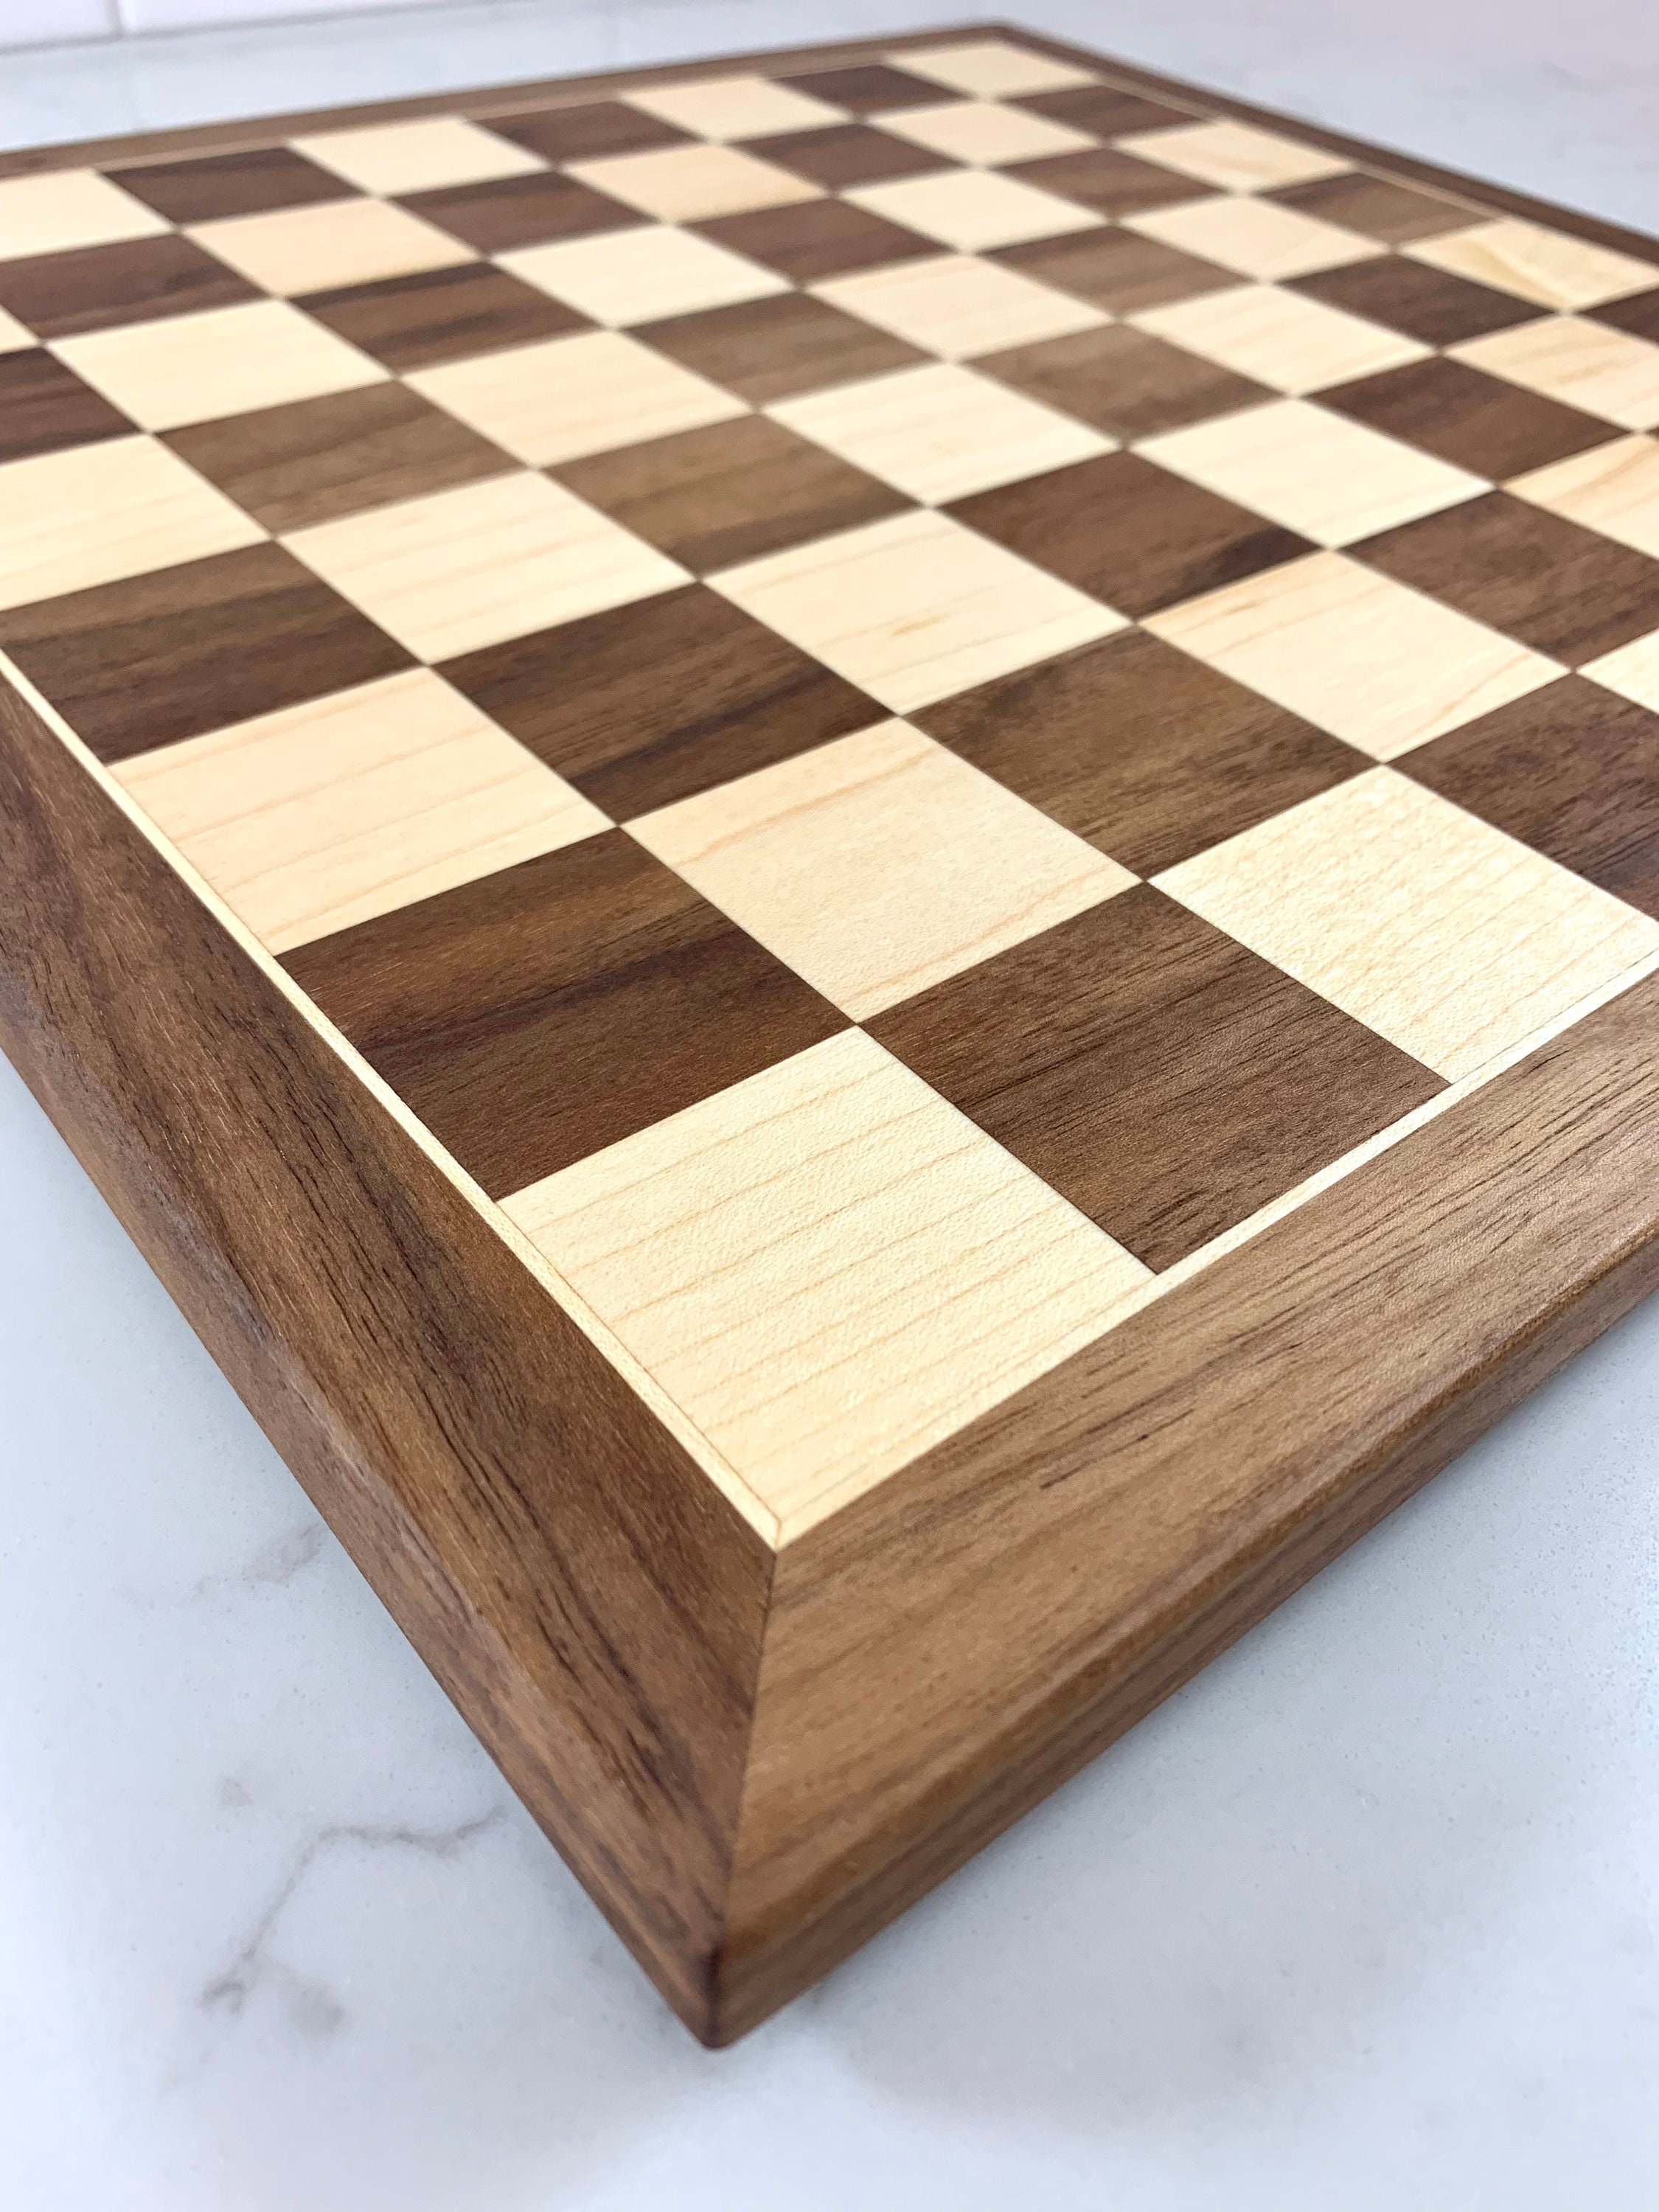 Mission Craft South American Walnut & Maple Solid Wood Chess Board - 2  Squares